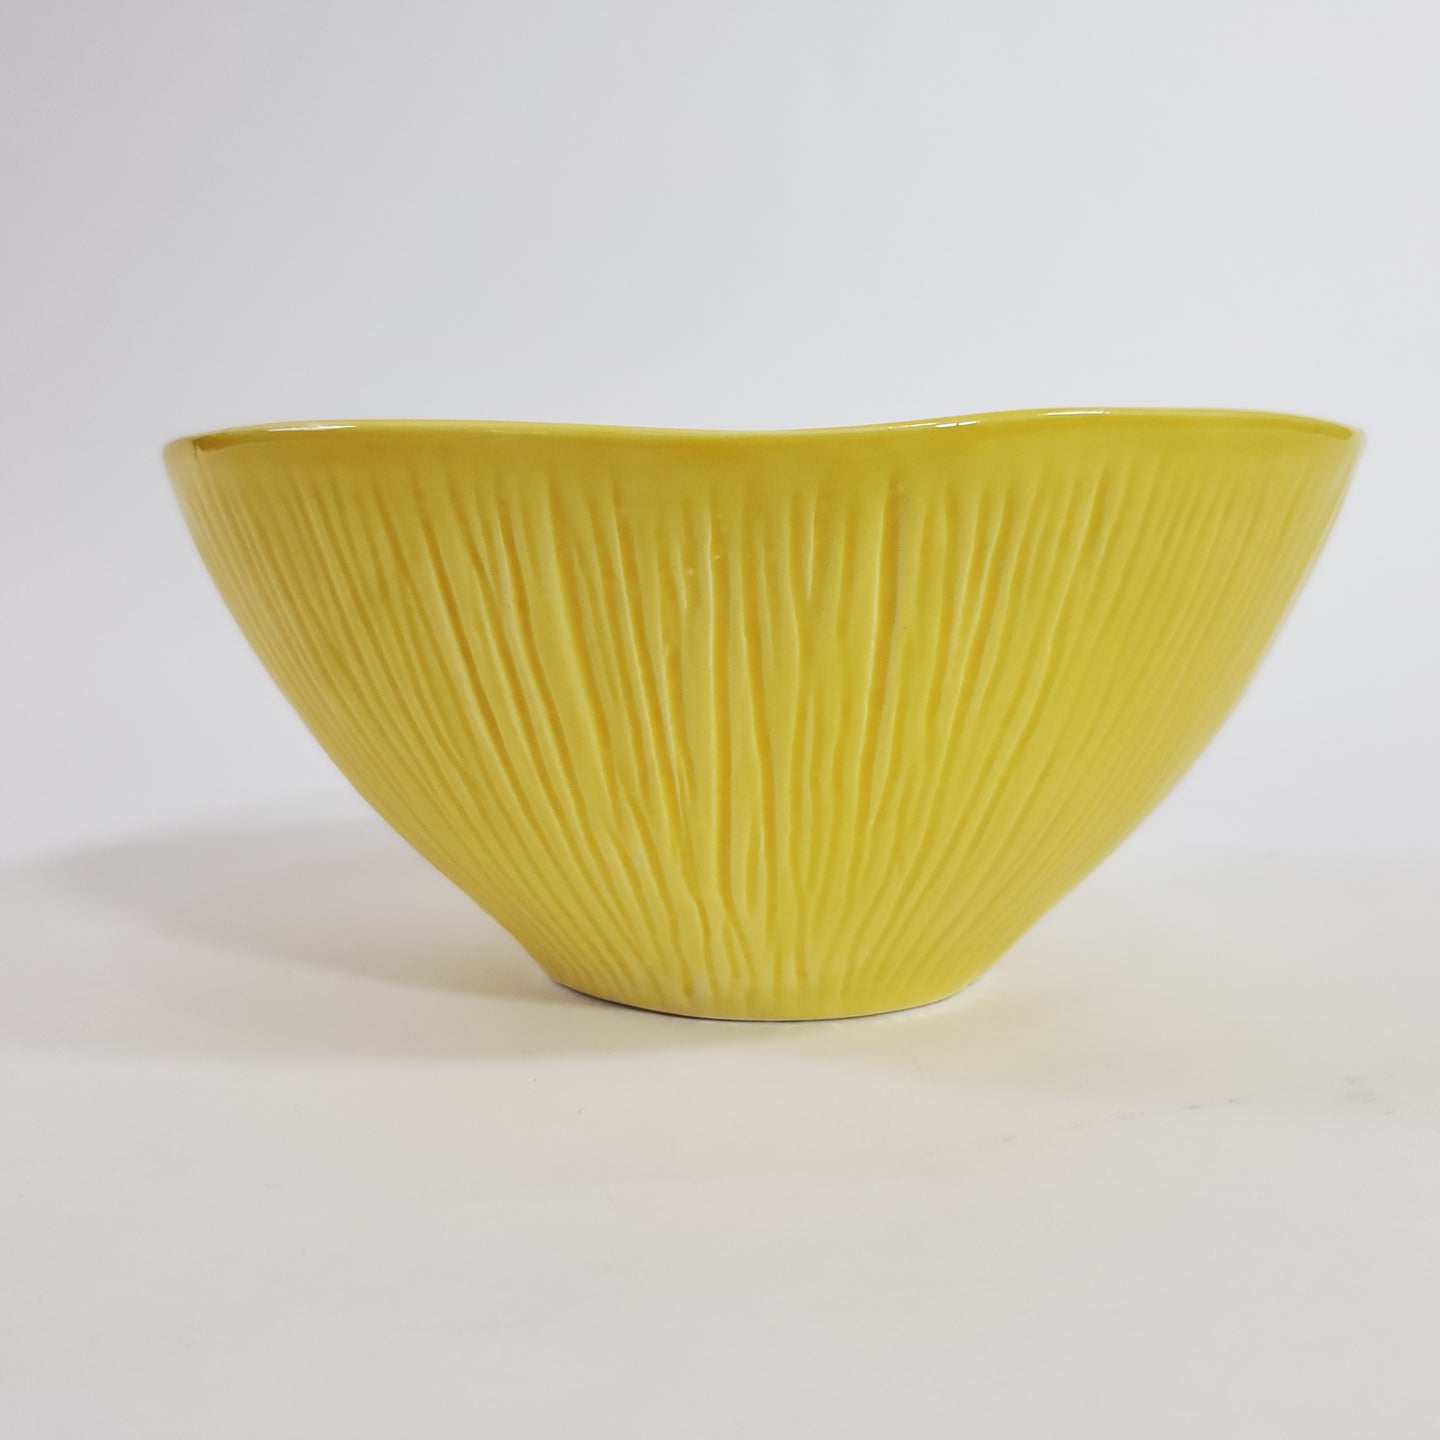 Ceramic Yellow Bowl Made in Italy - W 7